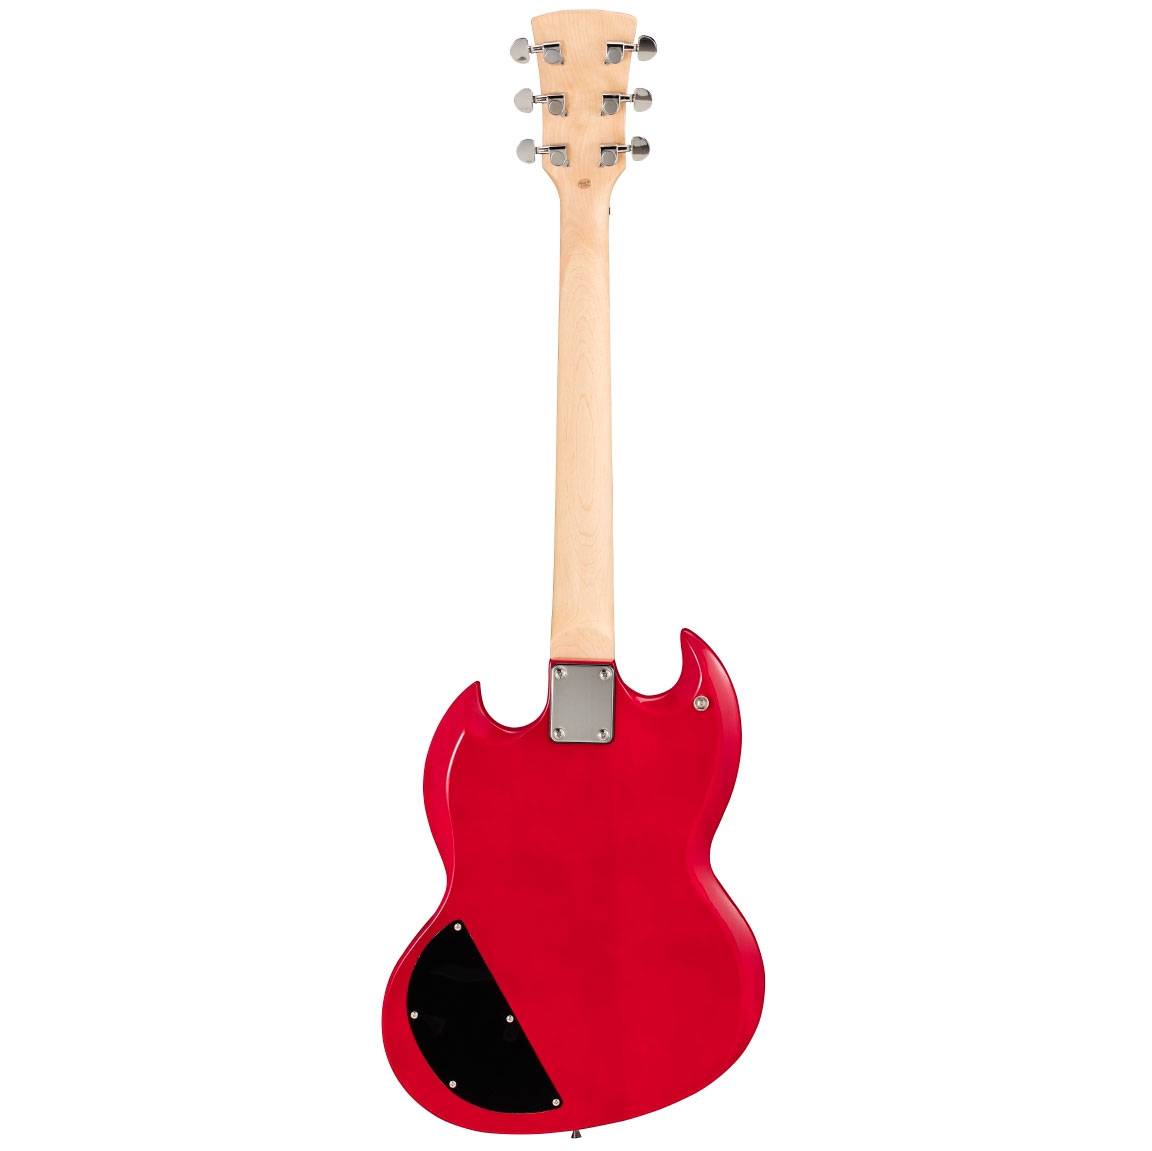 SOUNDSATION Buffalo ST Wine Red Electric Guitar